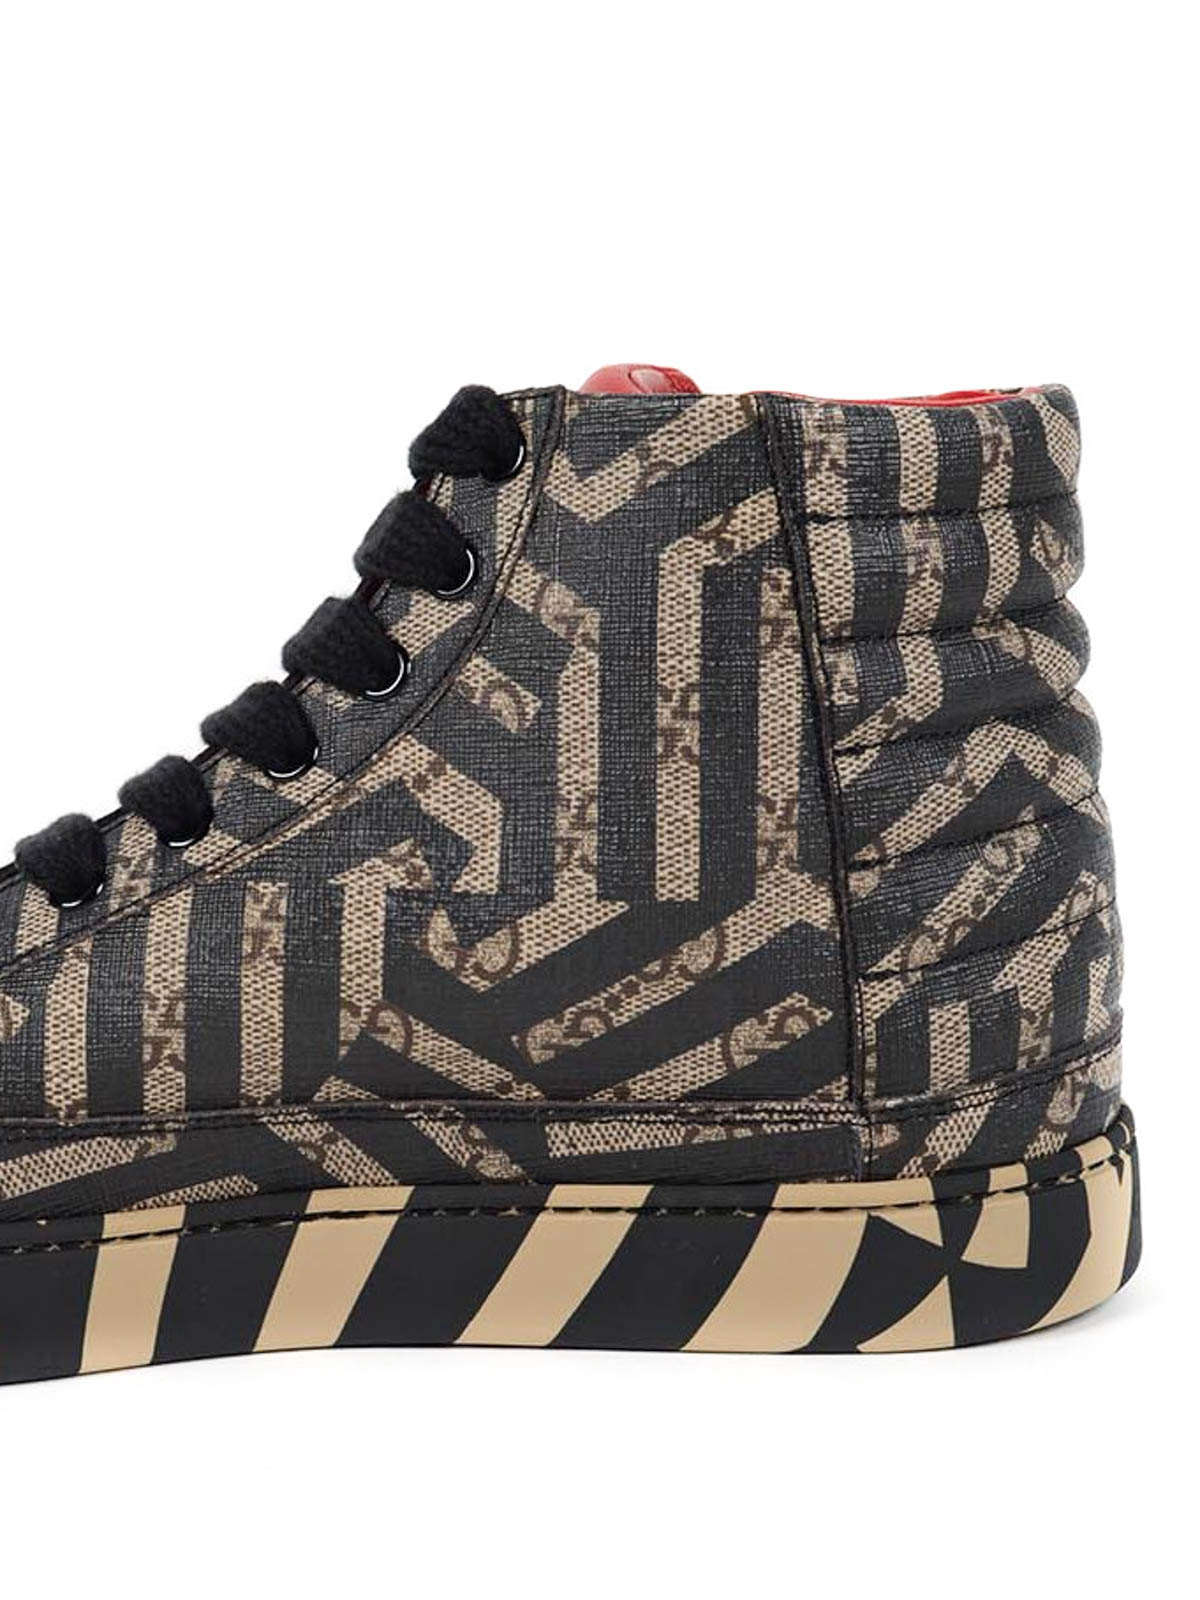 Trainers Gucci - Printed high top - 407342KVW809786